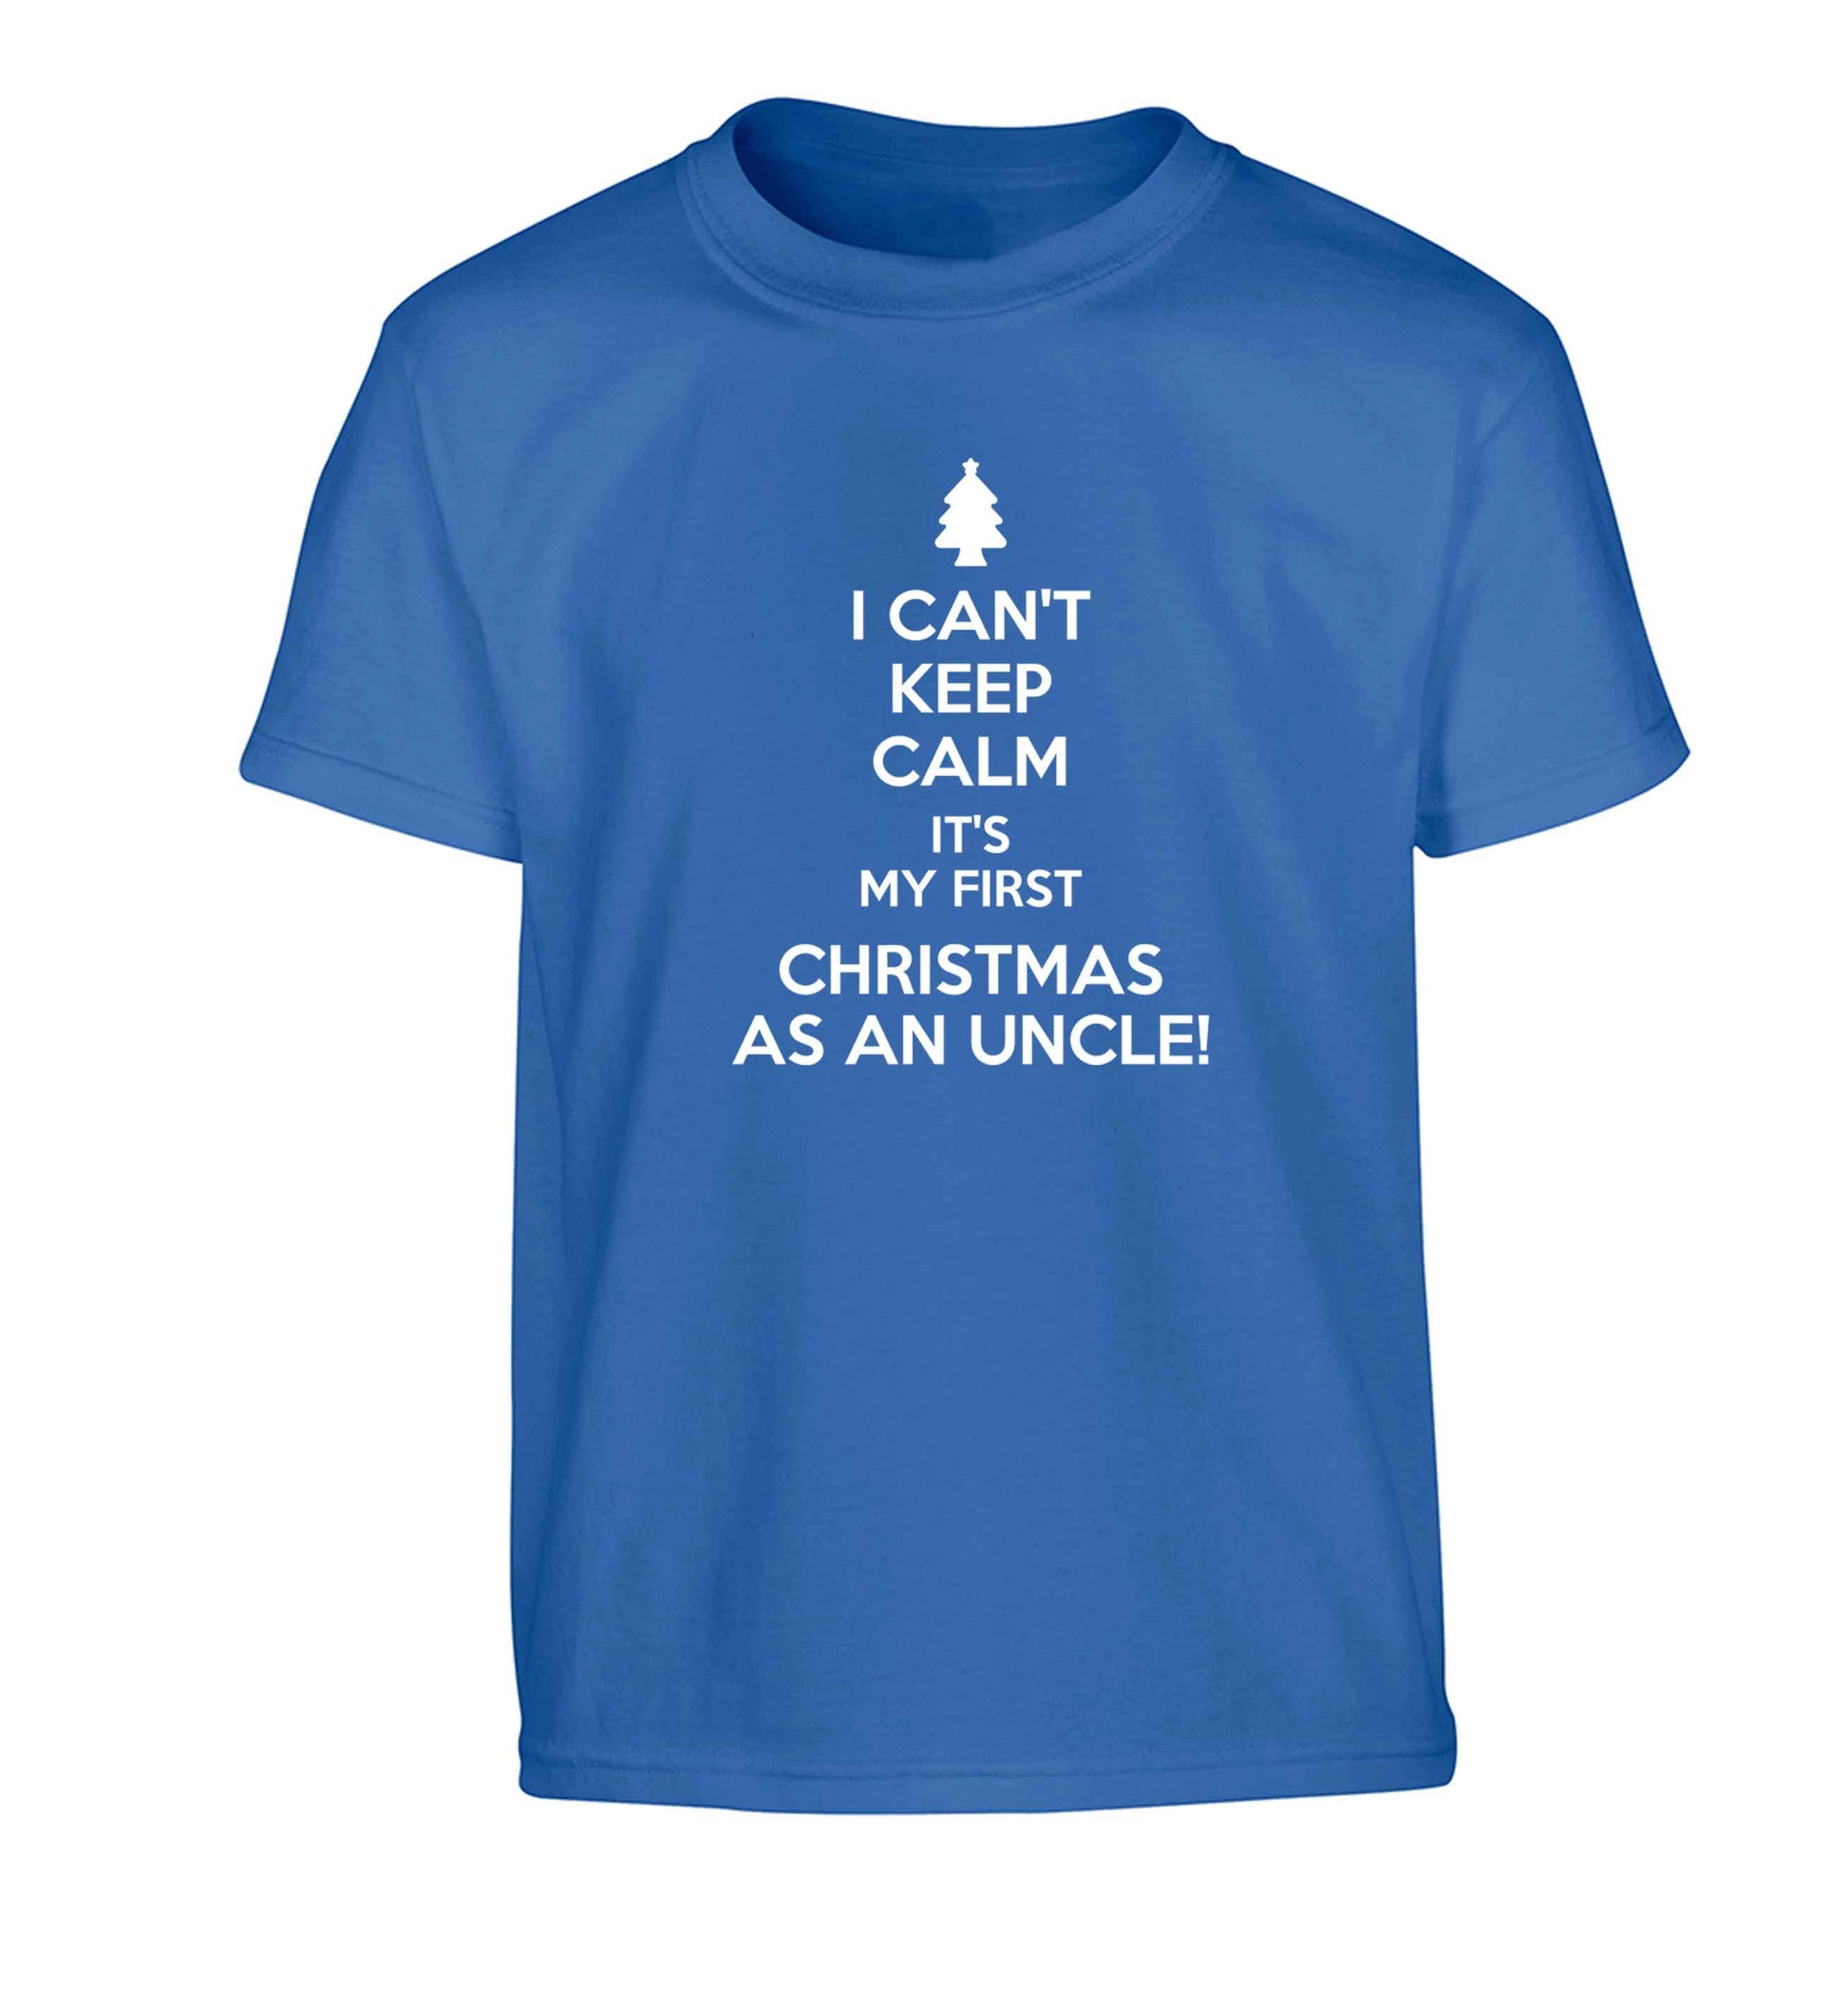 I can't keep calm it's my first Christmas as an uncle! Children's blue Tshirt 12-13 Years